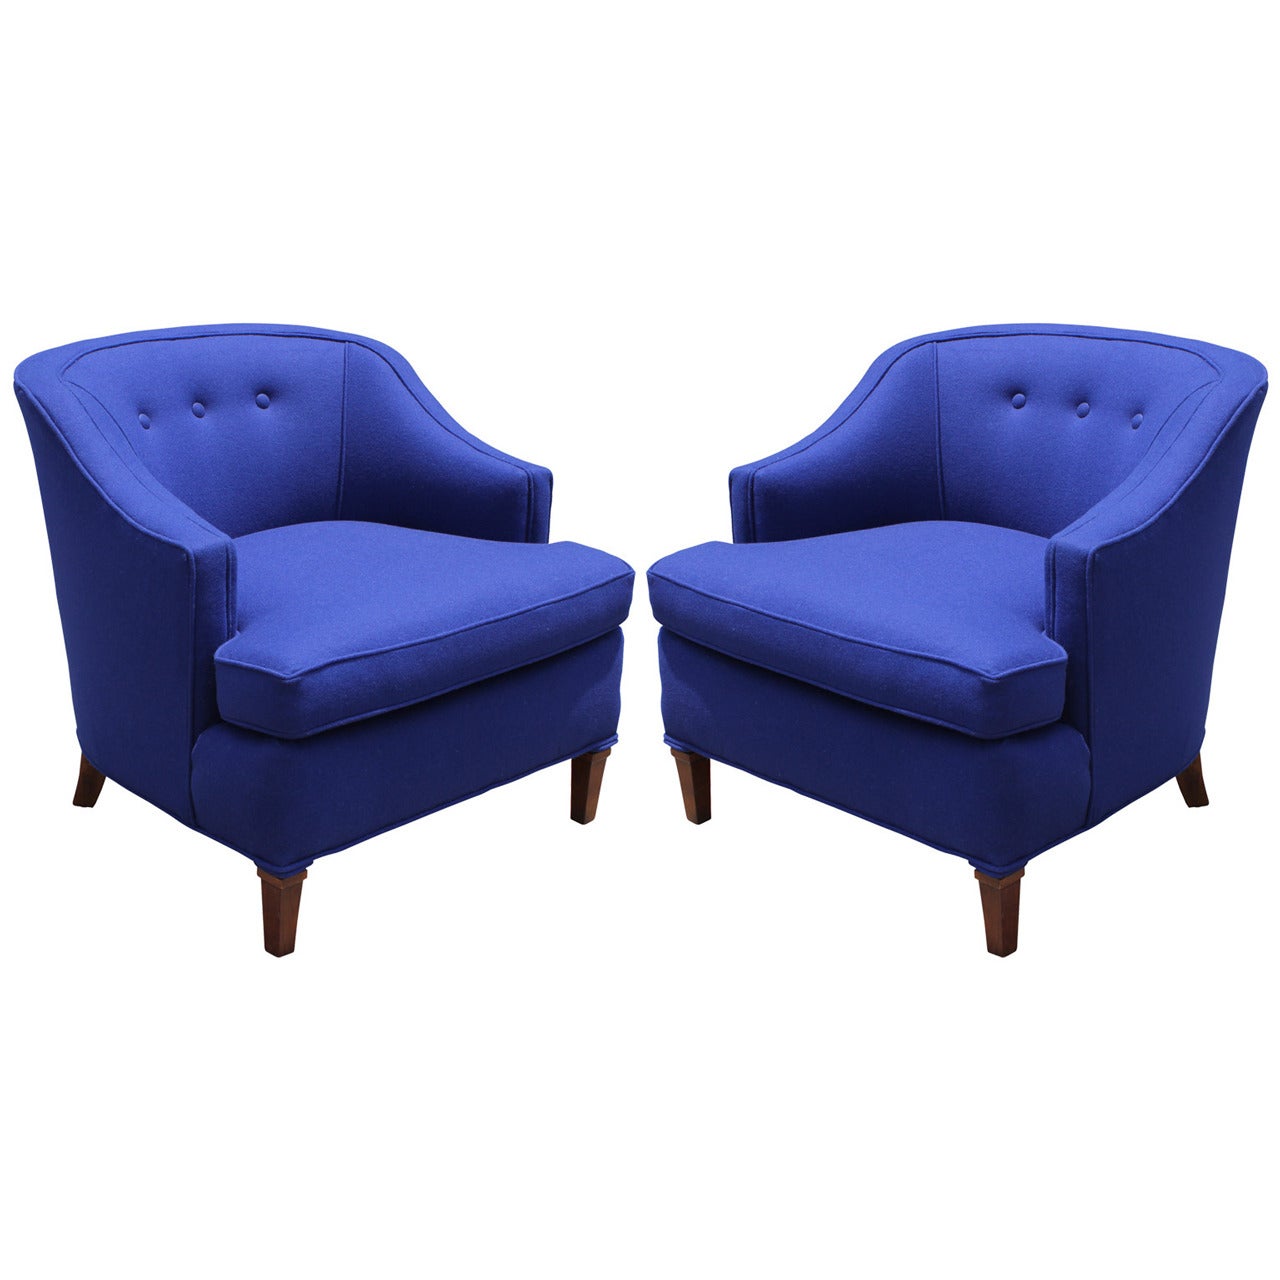 Deep Blue Restored Club or Lounge Chairs